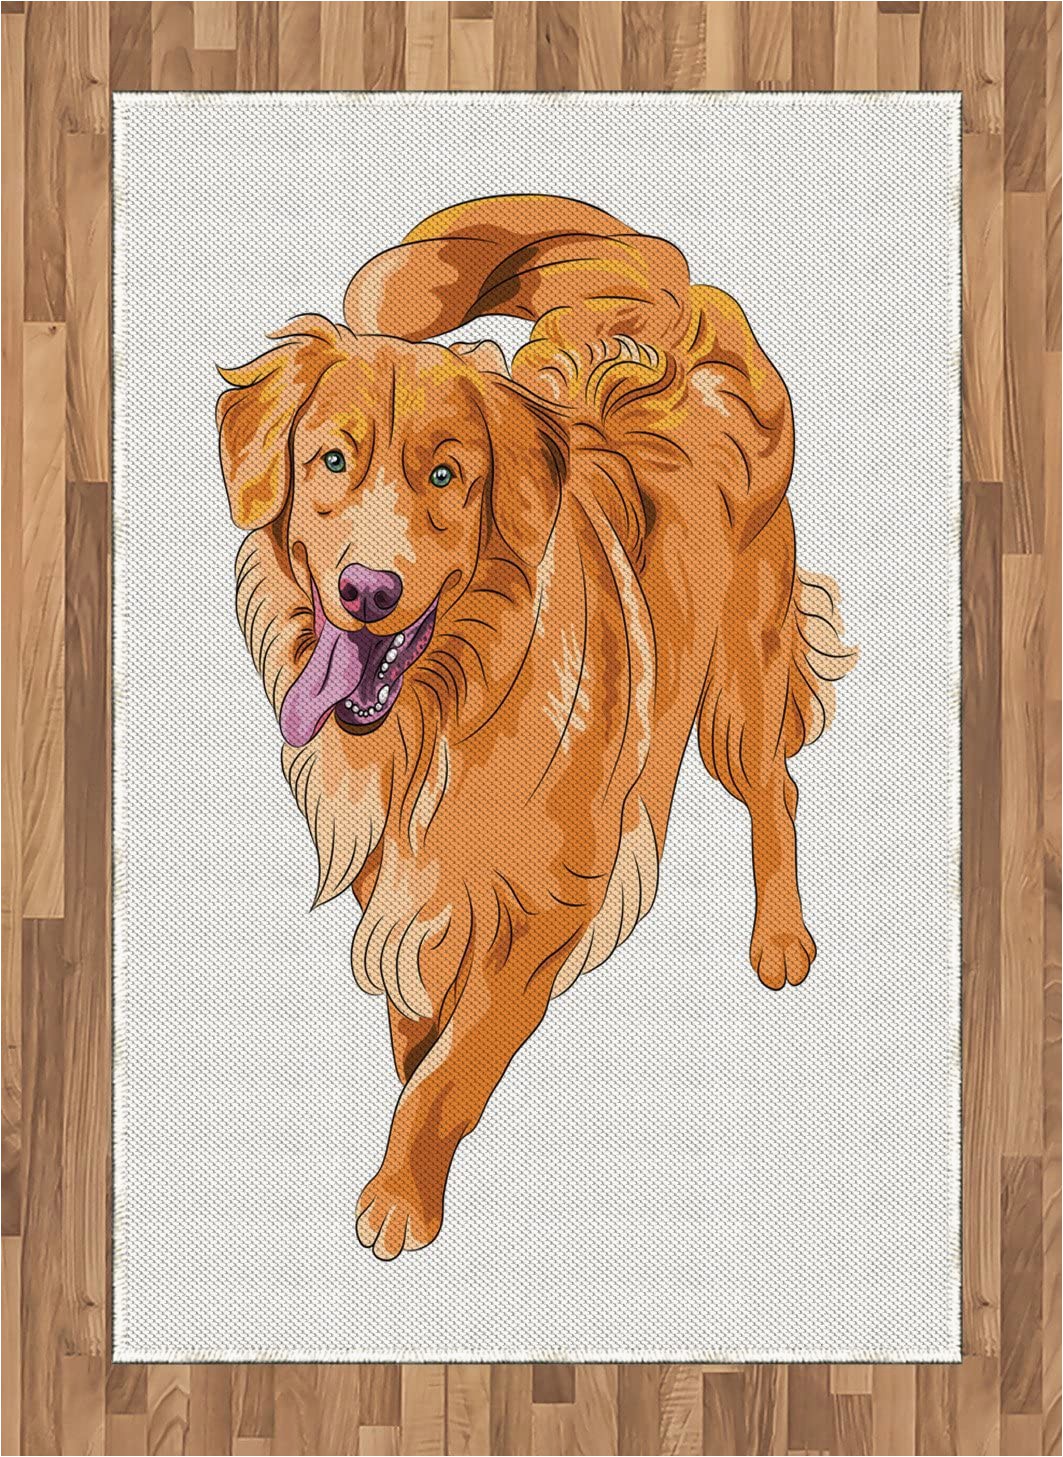 Best area Rug Material for Dogs Amazon Ambesonne Golden Retriever area Rug Playful Dog